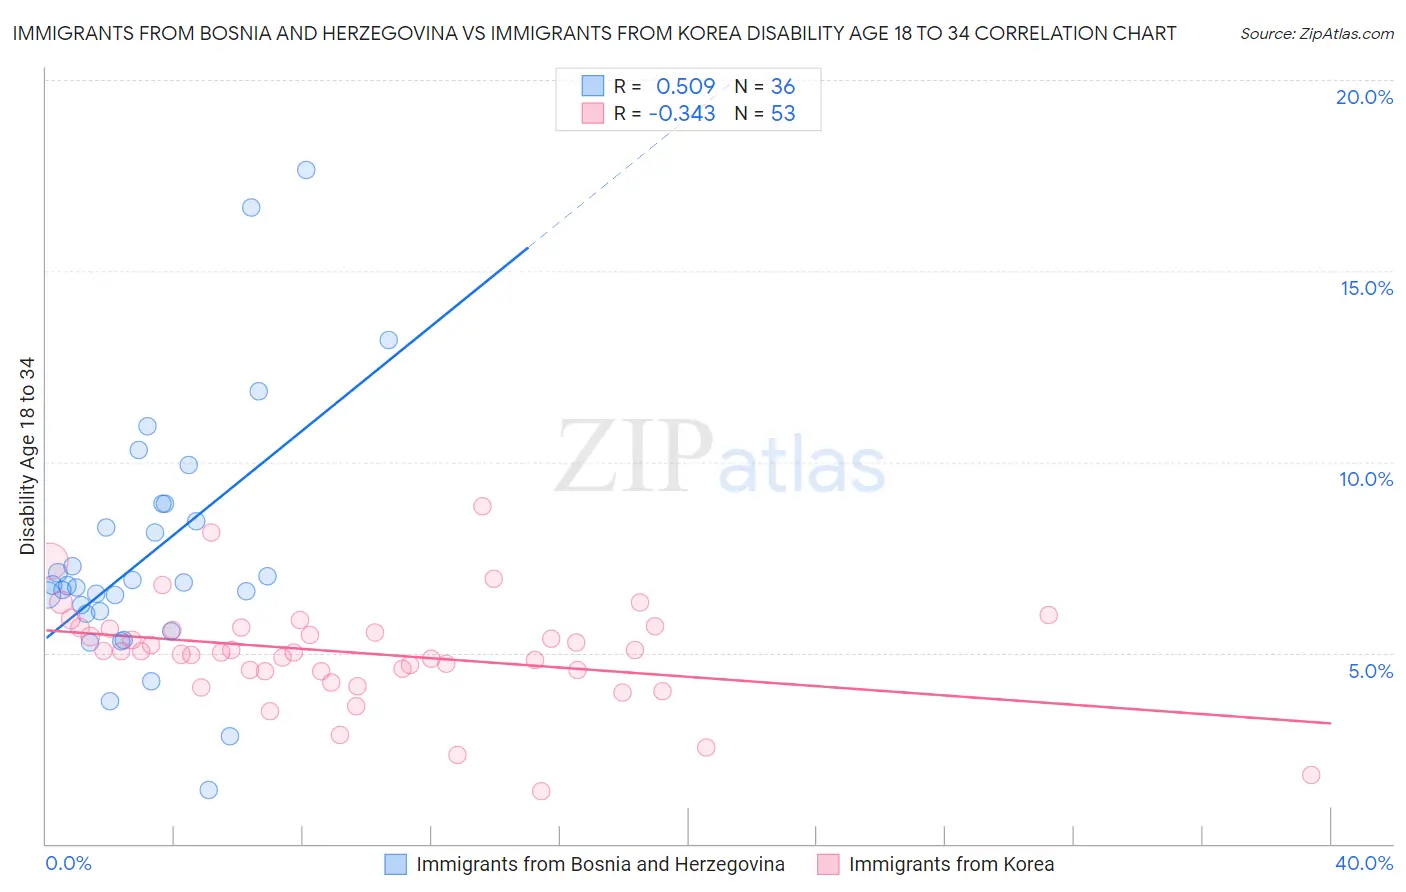 Immigrants from Bosnia and Herzegovina vs Immigrants from Korea Disability Age 18 to 34